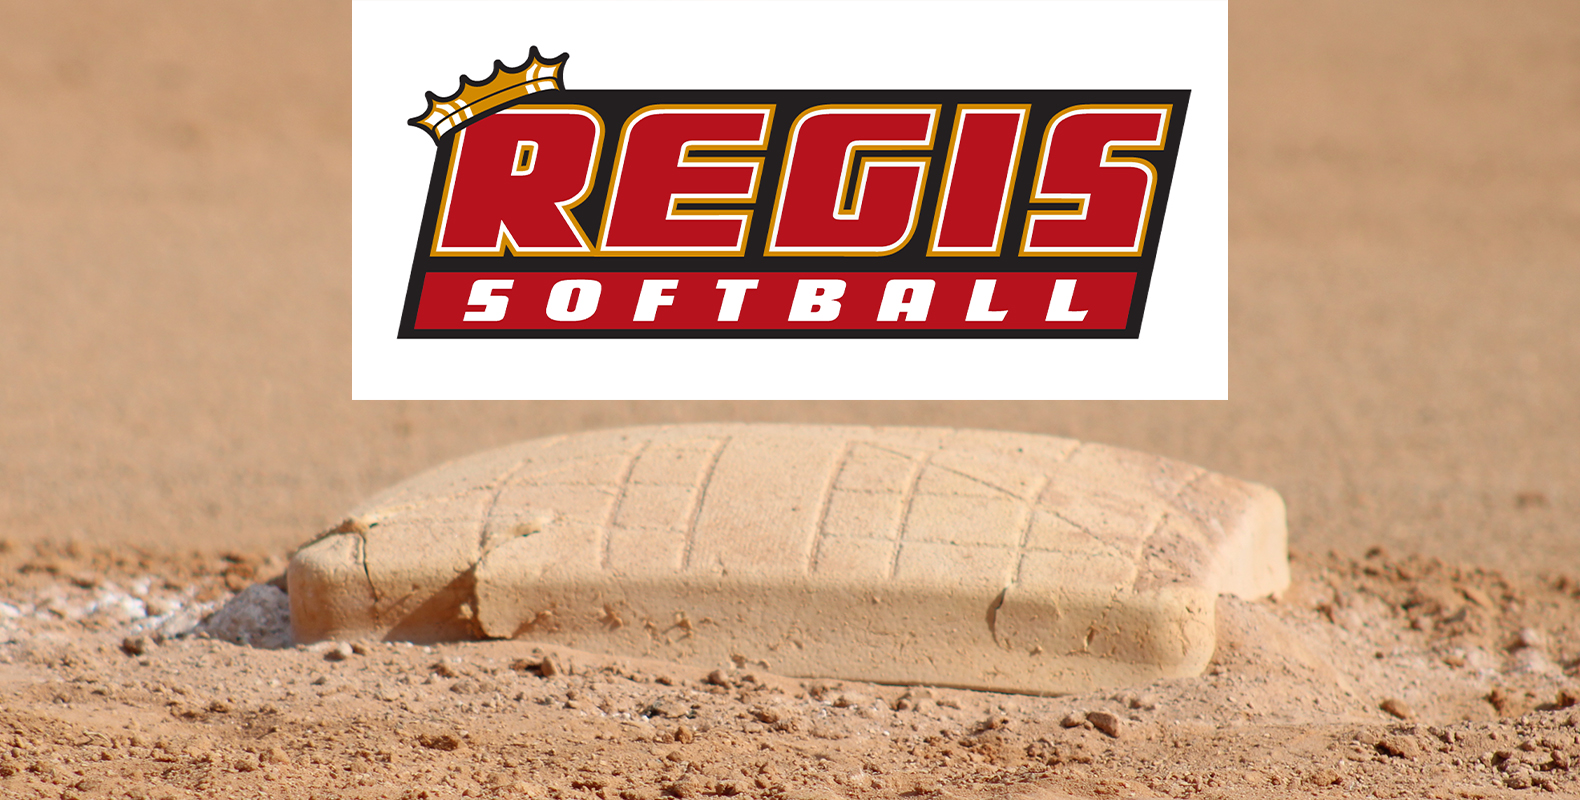 March 22-24 Schedule Changes for Regis Softball